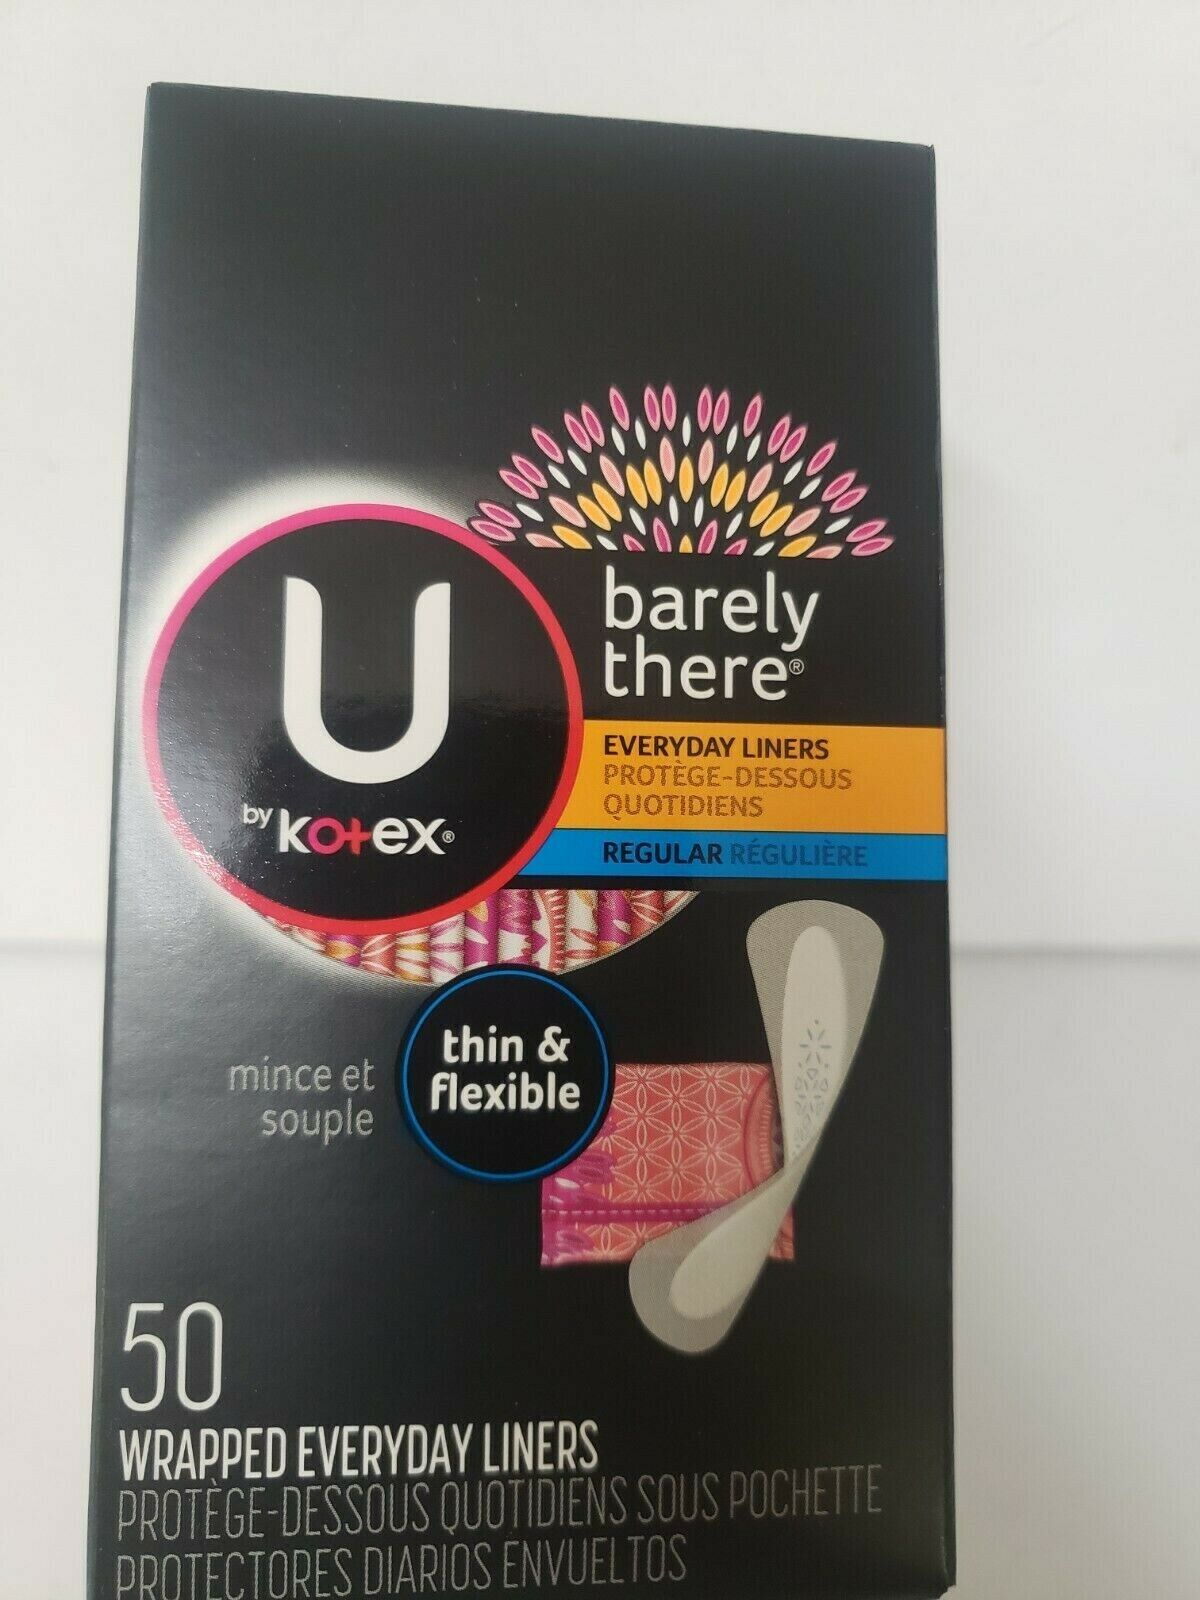 U by Kotex Barely Super beauty product restock quality top! There Wrapped Liners - ct Everyday 50 Limited time for free shipping 3-PACK